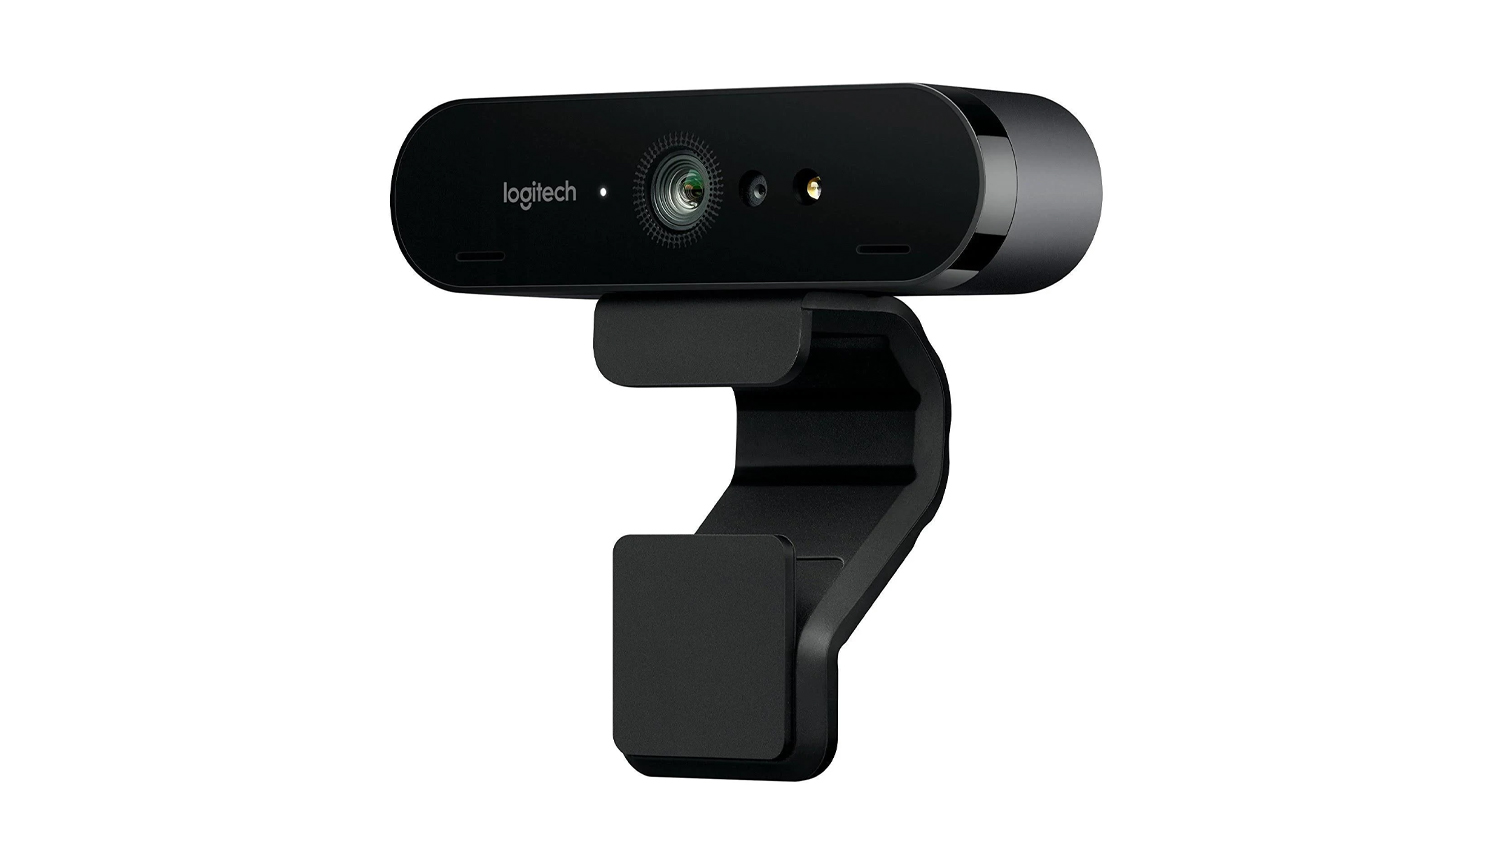 Logitech BRIO 4K Pro at an angle against a white background